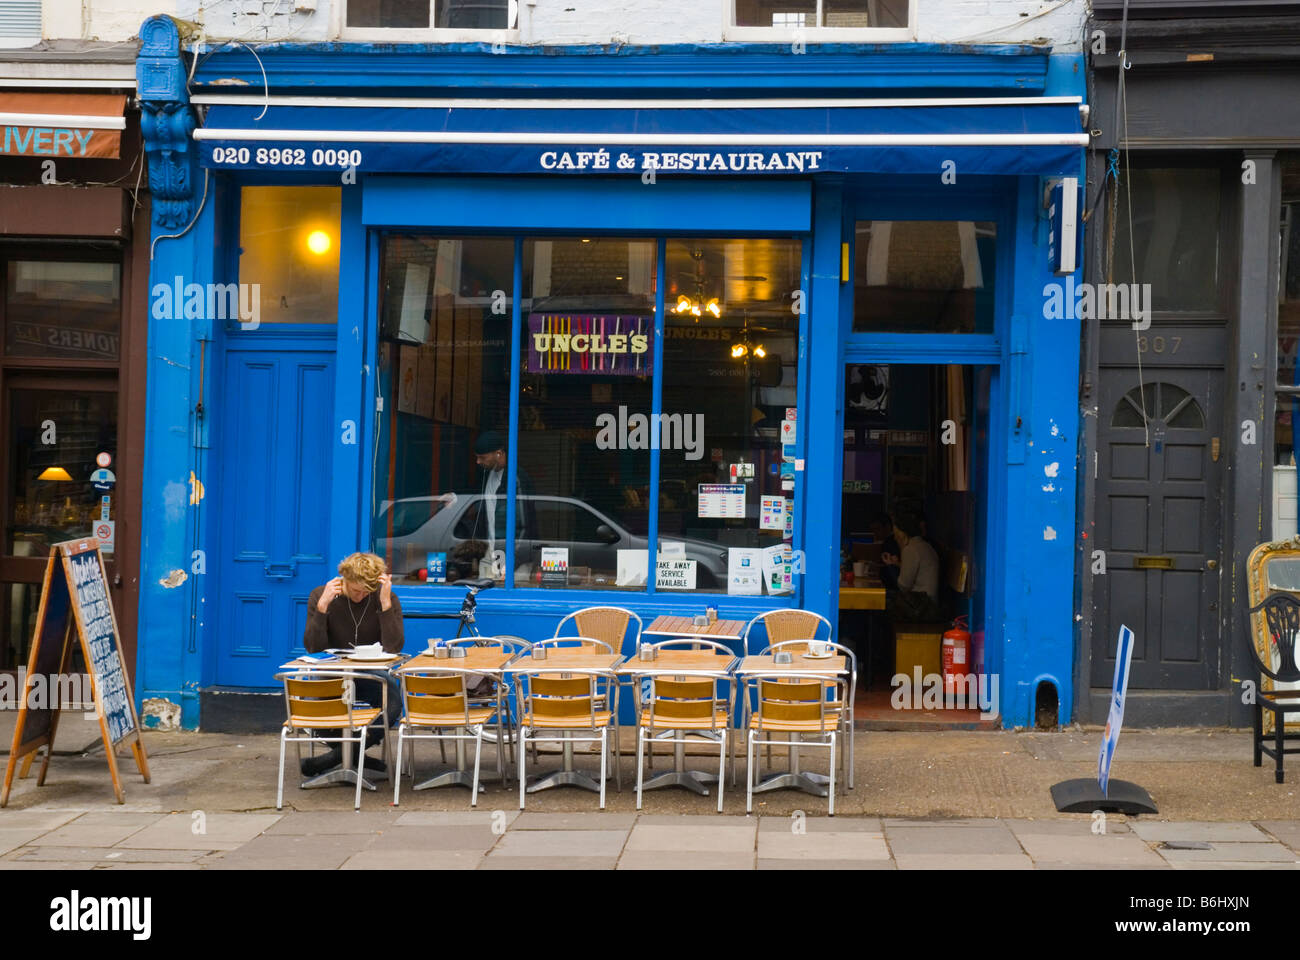 Uncles cafe and restaurant along Portobello Road in London England UK Stock Photo